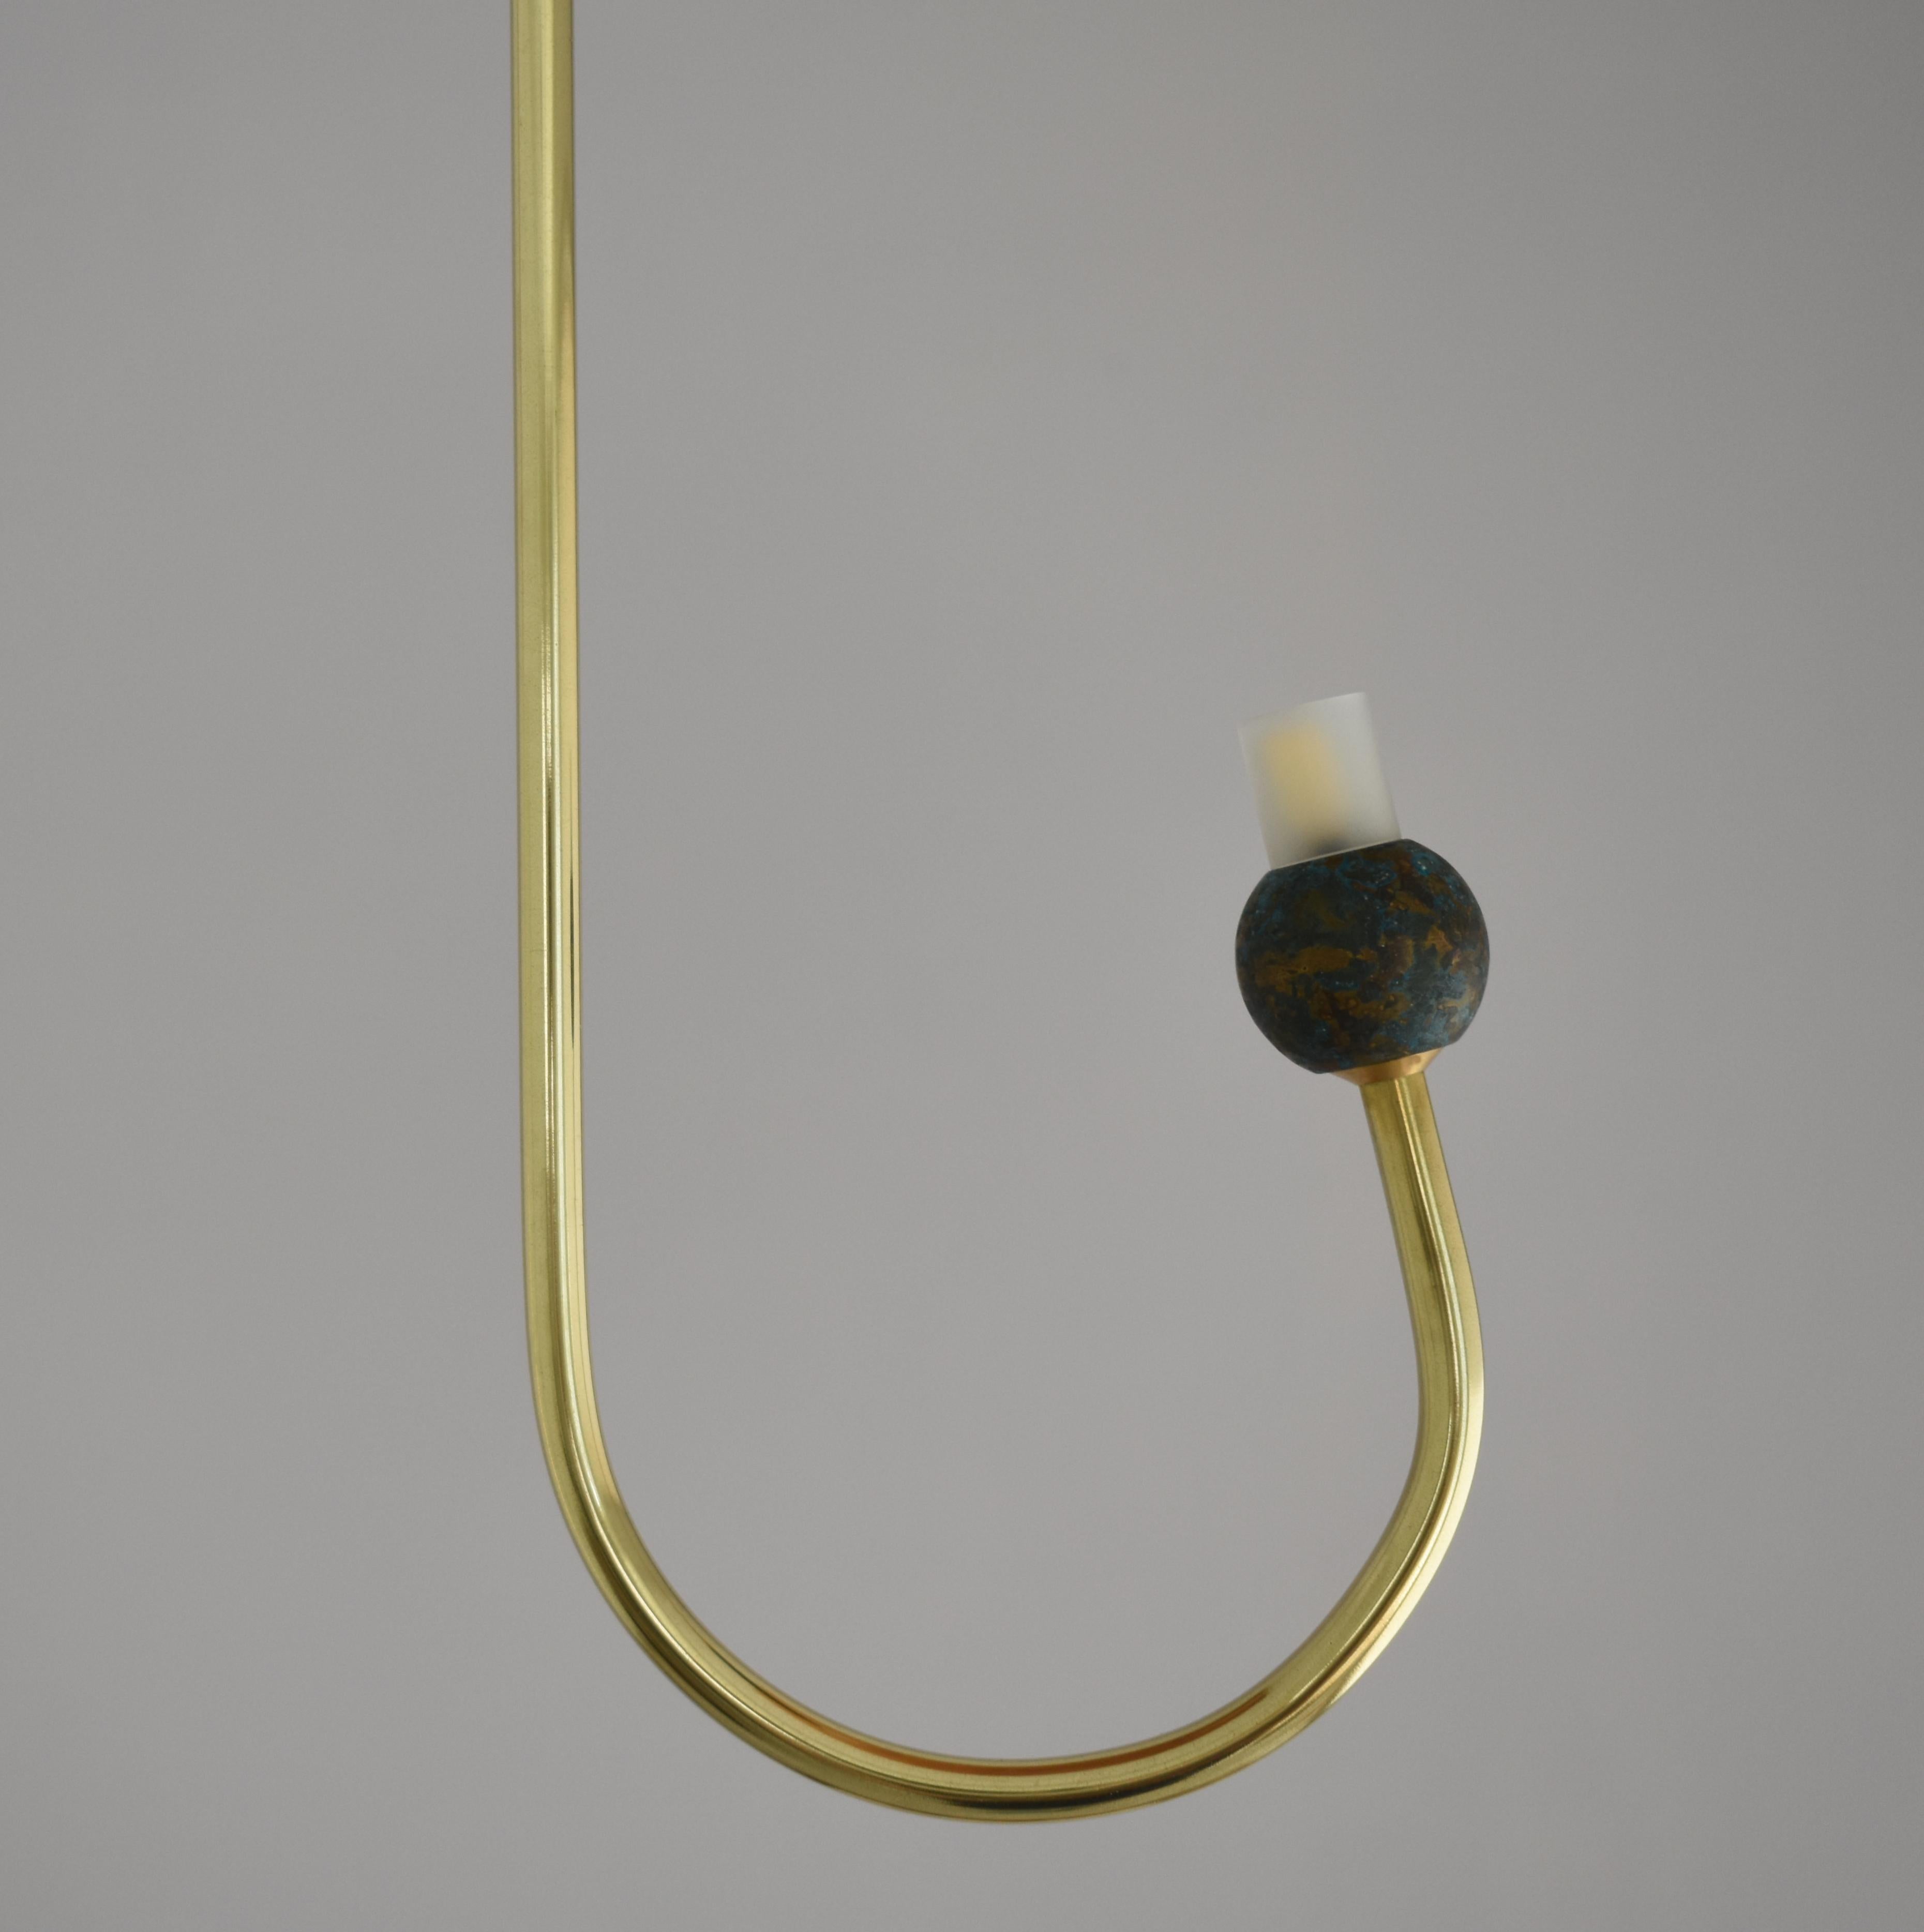 Greek Brass Sculpted Light Suspension, 'Let's Talk' by Periclis Frementitis